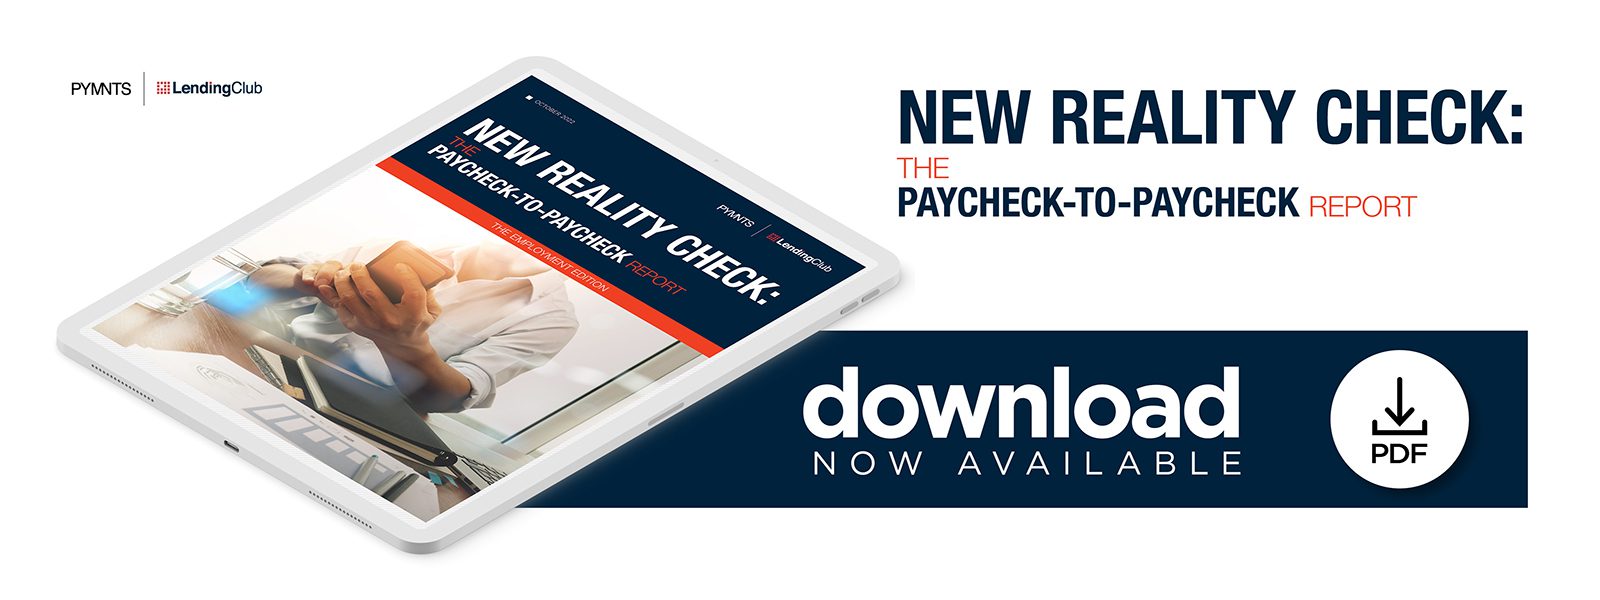 Lending Club - New Reality Check: The Paycheck-To-Paycheck Report: The Employment Edition - October 2022 - Learn how inflationary pressures have impacted employment and wages among paycheck-to-paycheck consumers